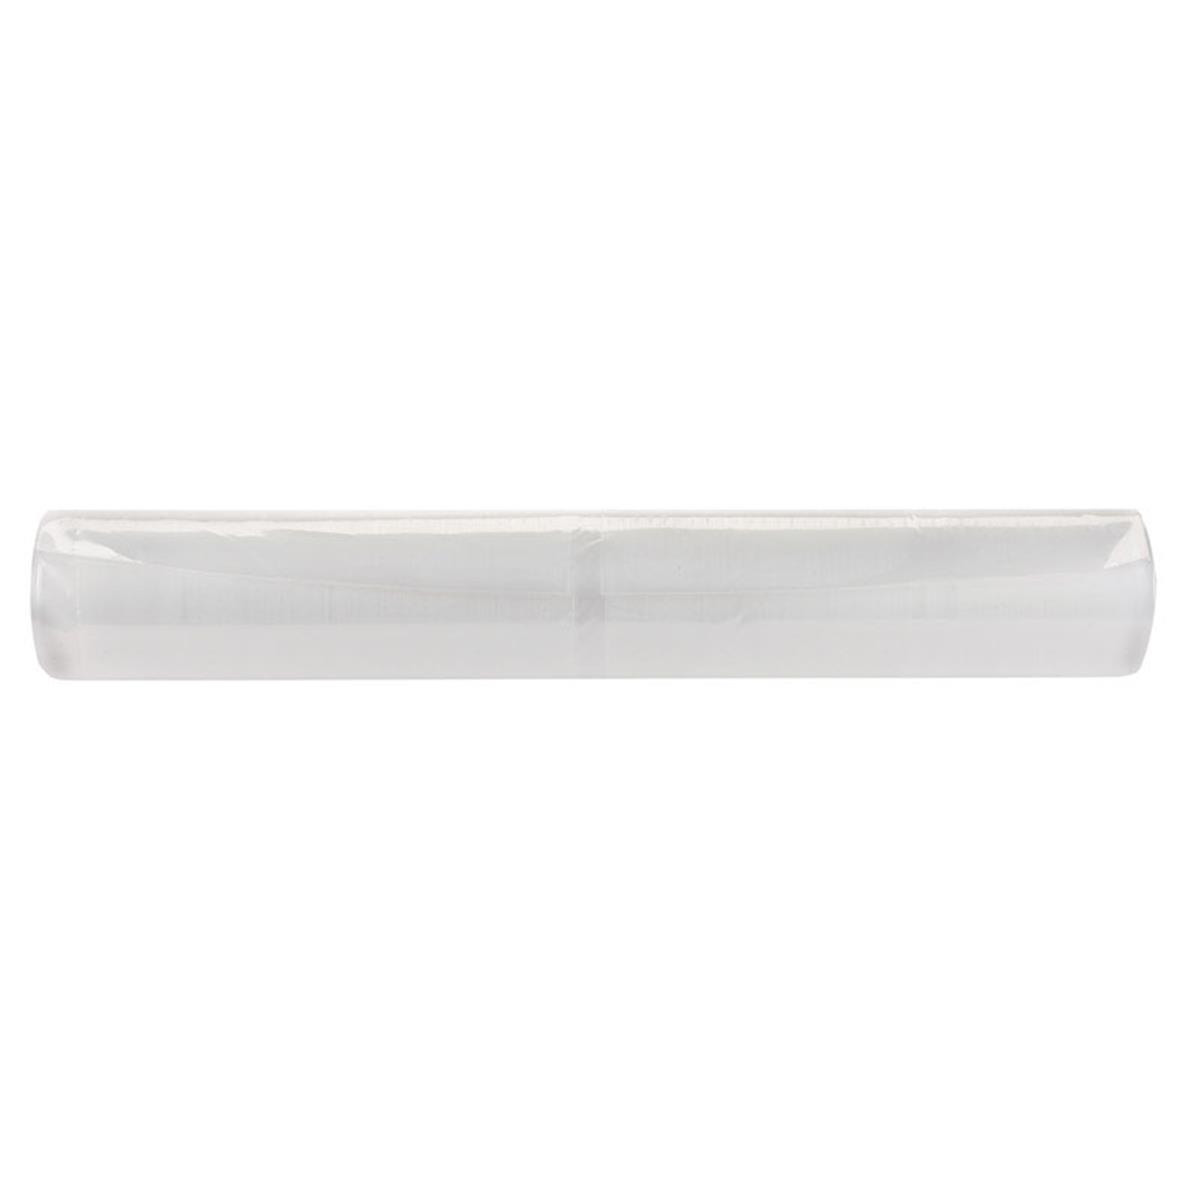 Picture of Berry Plastics 625902 4 mil 8 x 50 ft. Film Polyethylene Sheeting - Clear